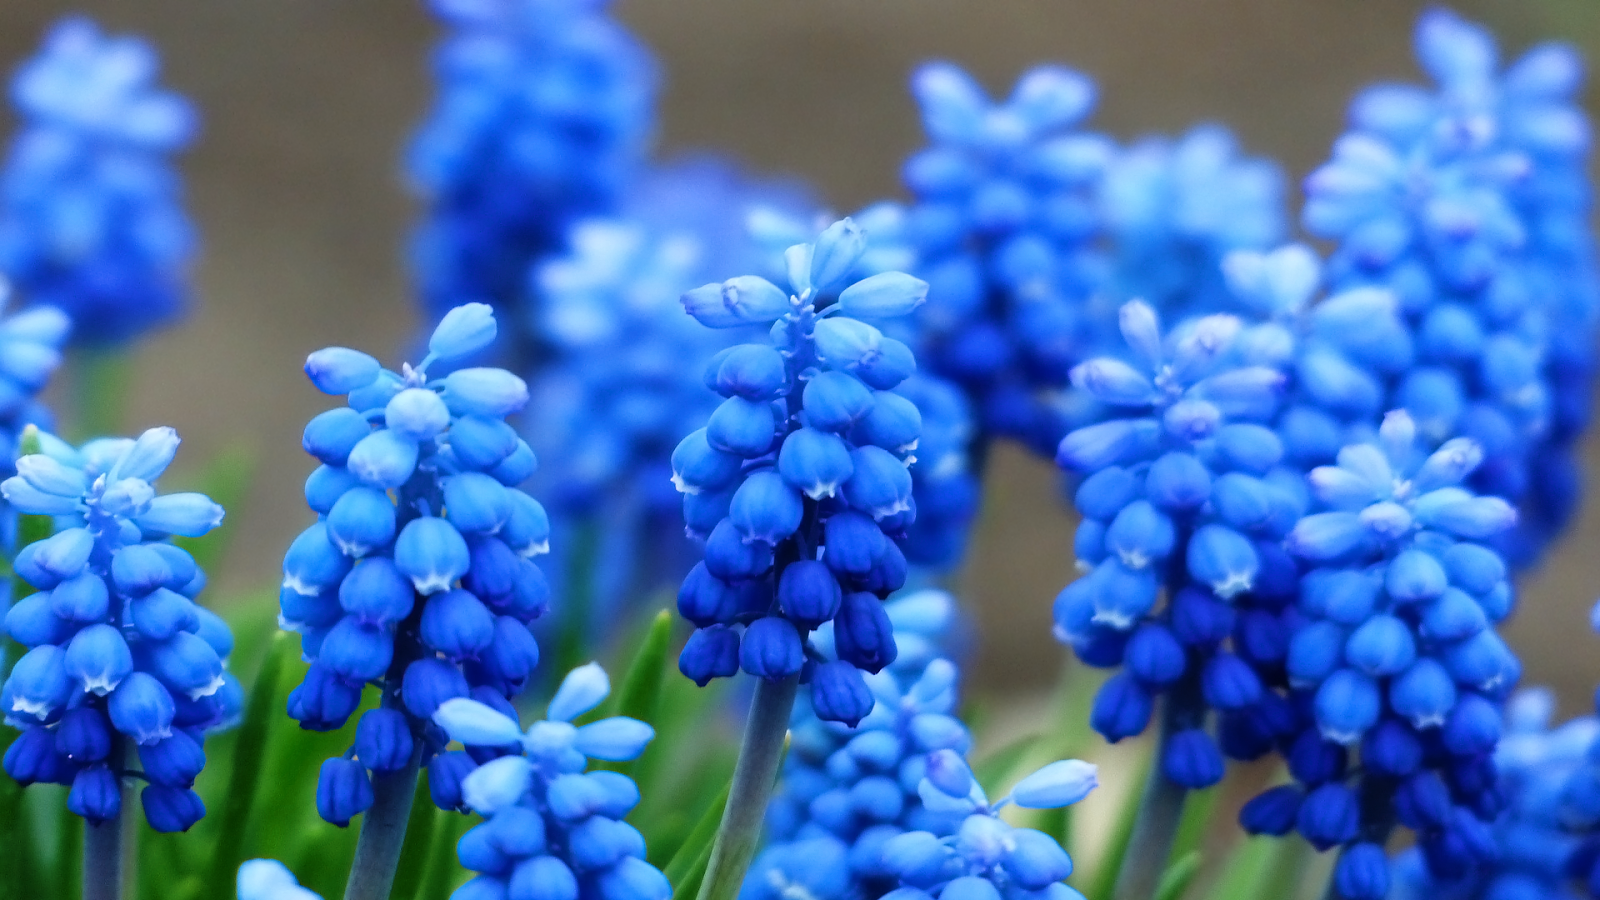 Blue Hyacinth Wallpaper The Brain Prion From Hell No Right To Be